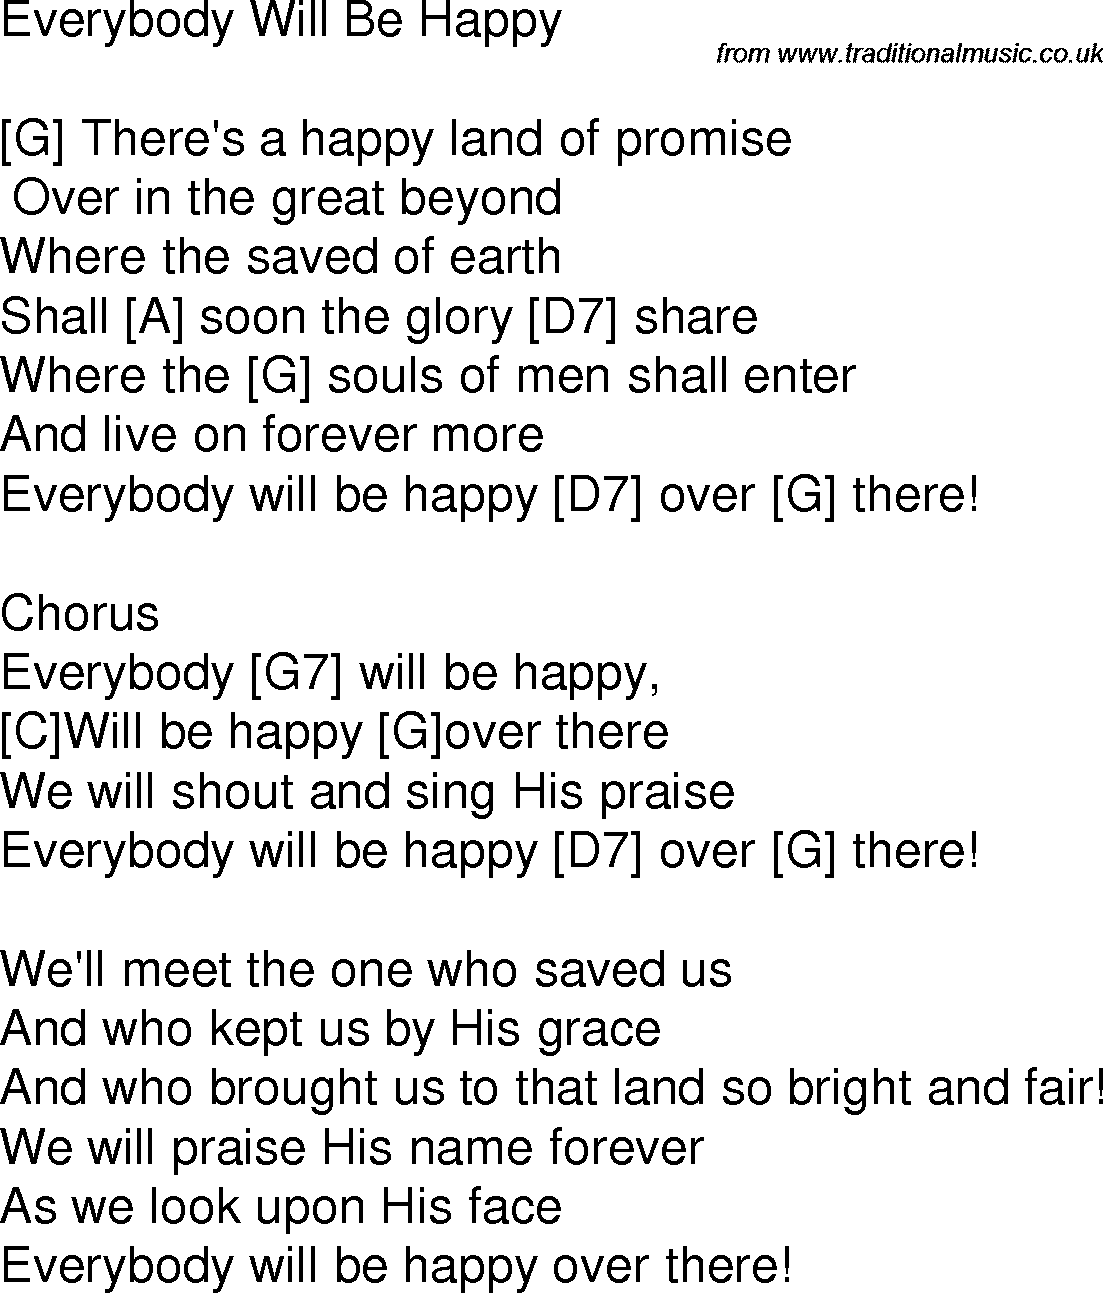 Old time song lyrics with chords for Everybody Will Be Happy G